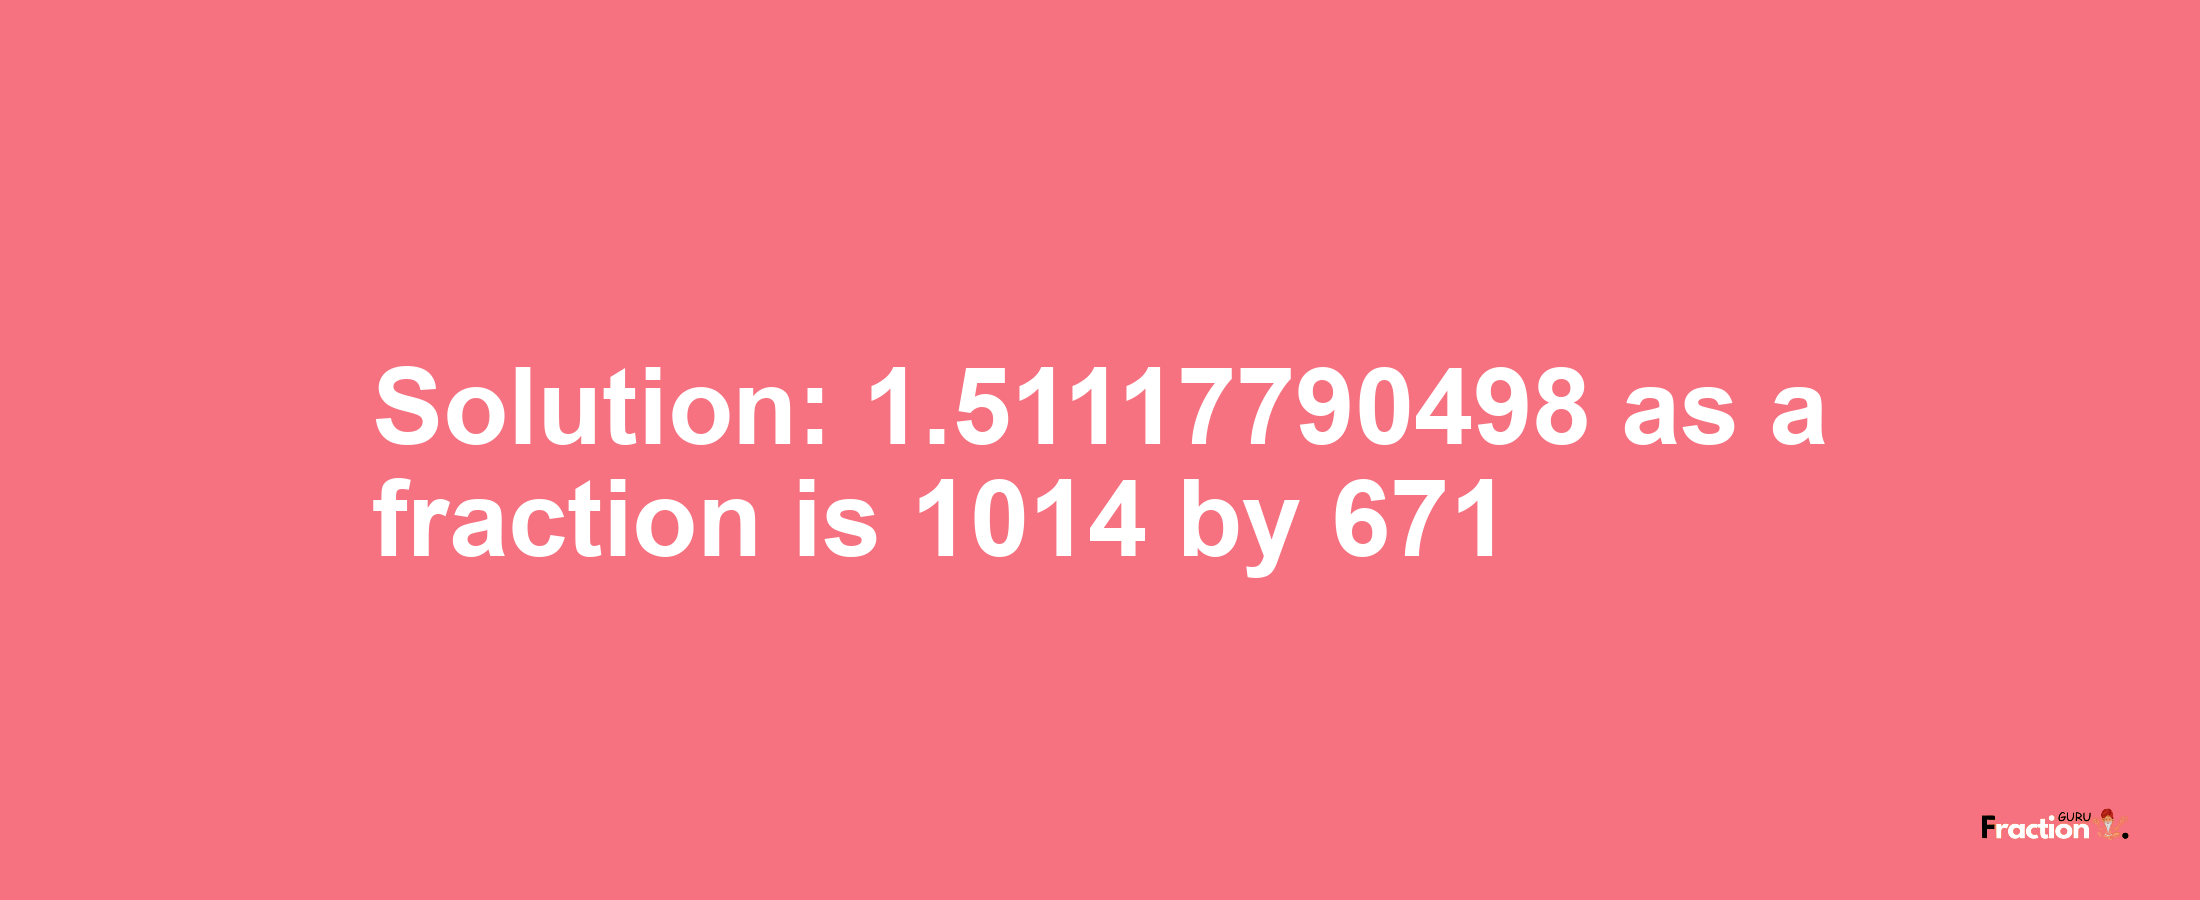 Solution:1.51117790498 as a fraction is 1014/671